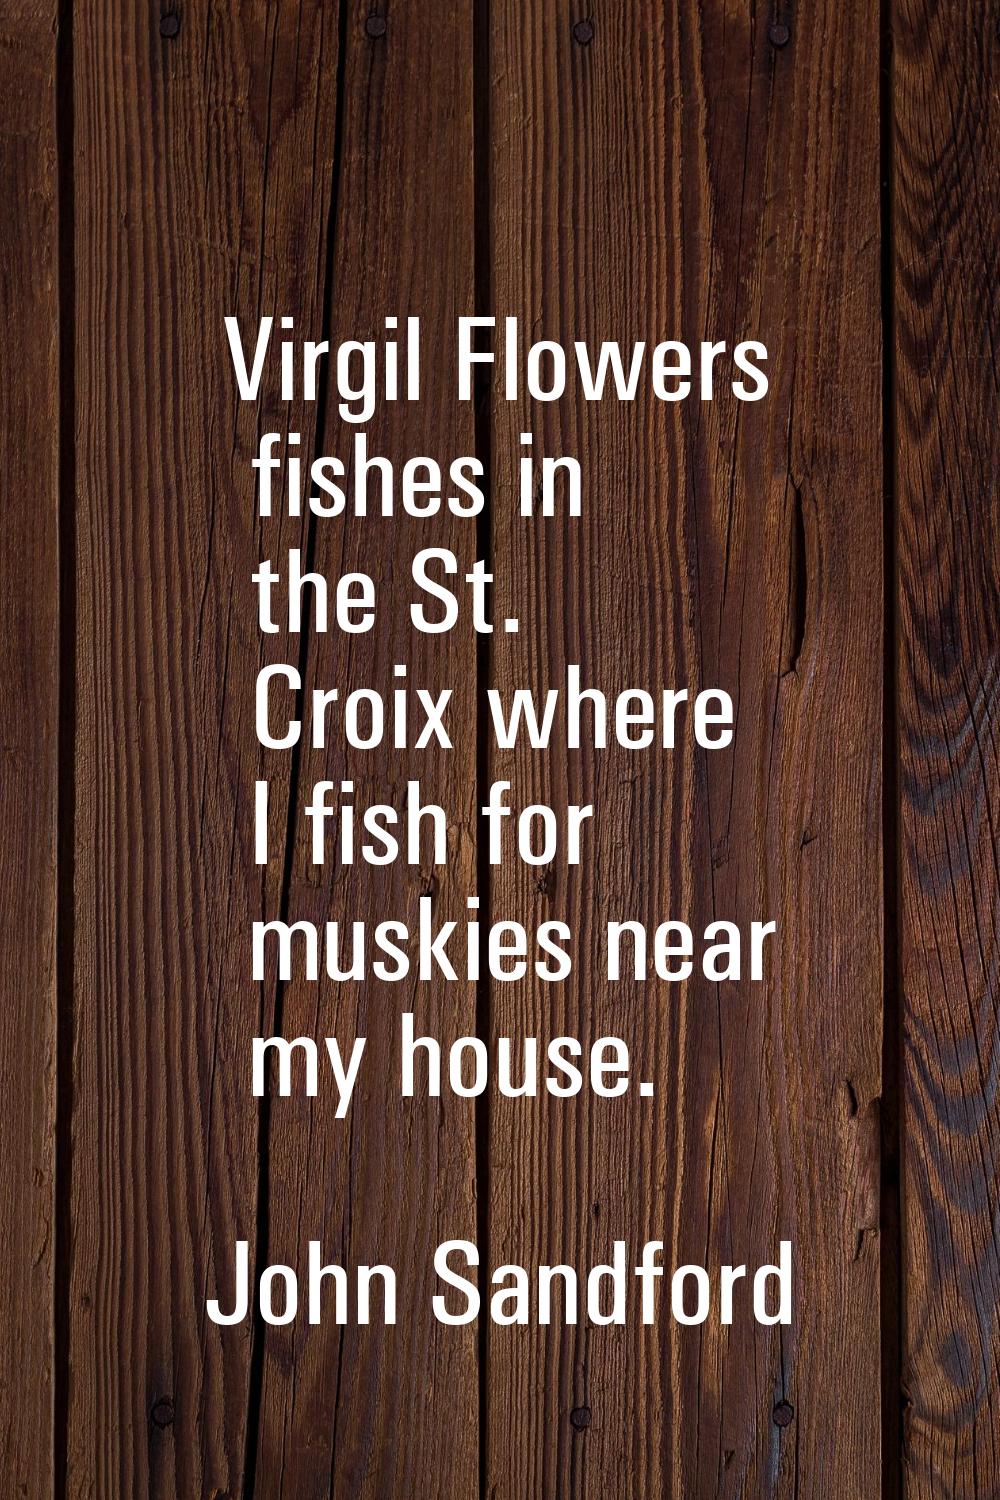 Virgil Flowers fishes in the St. Croix where I fish for muskies near my house.